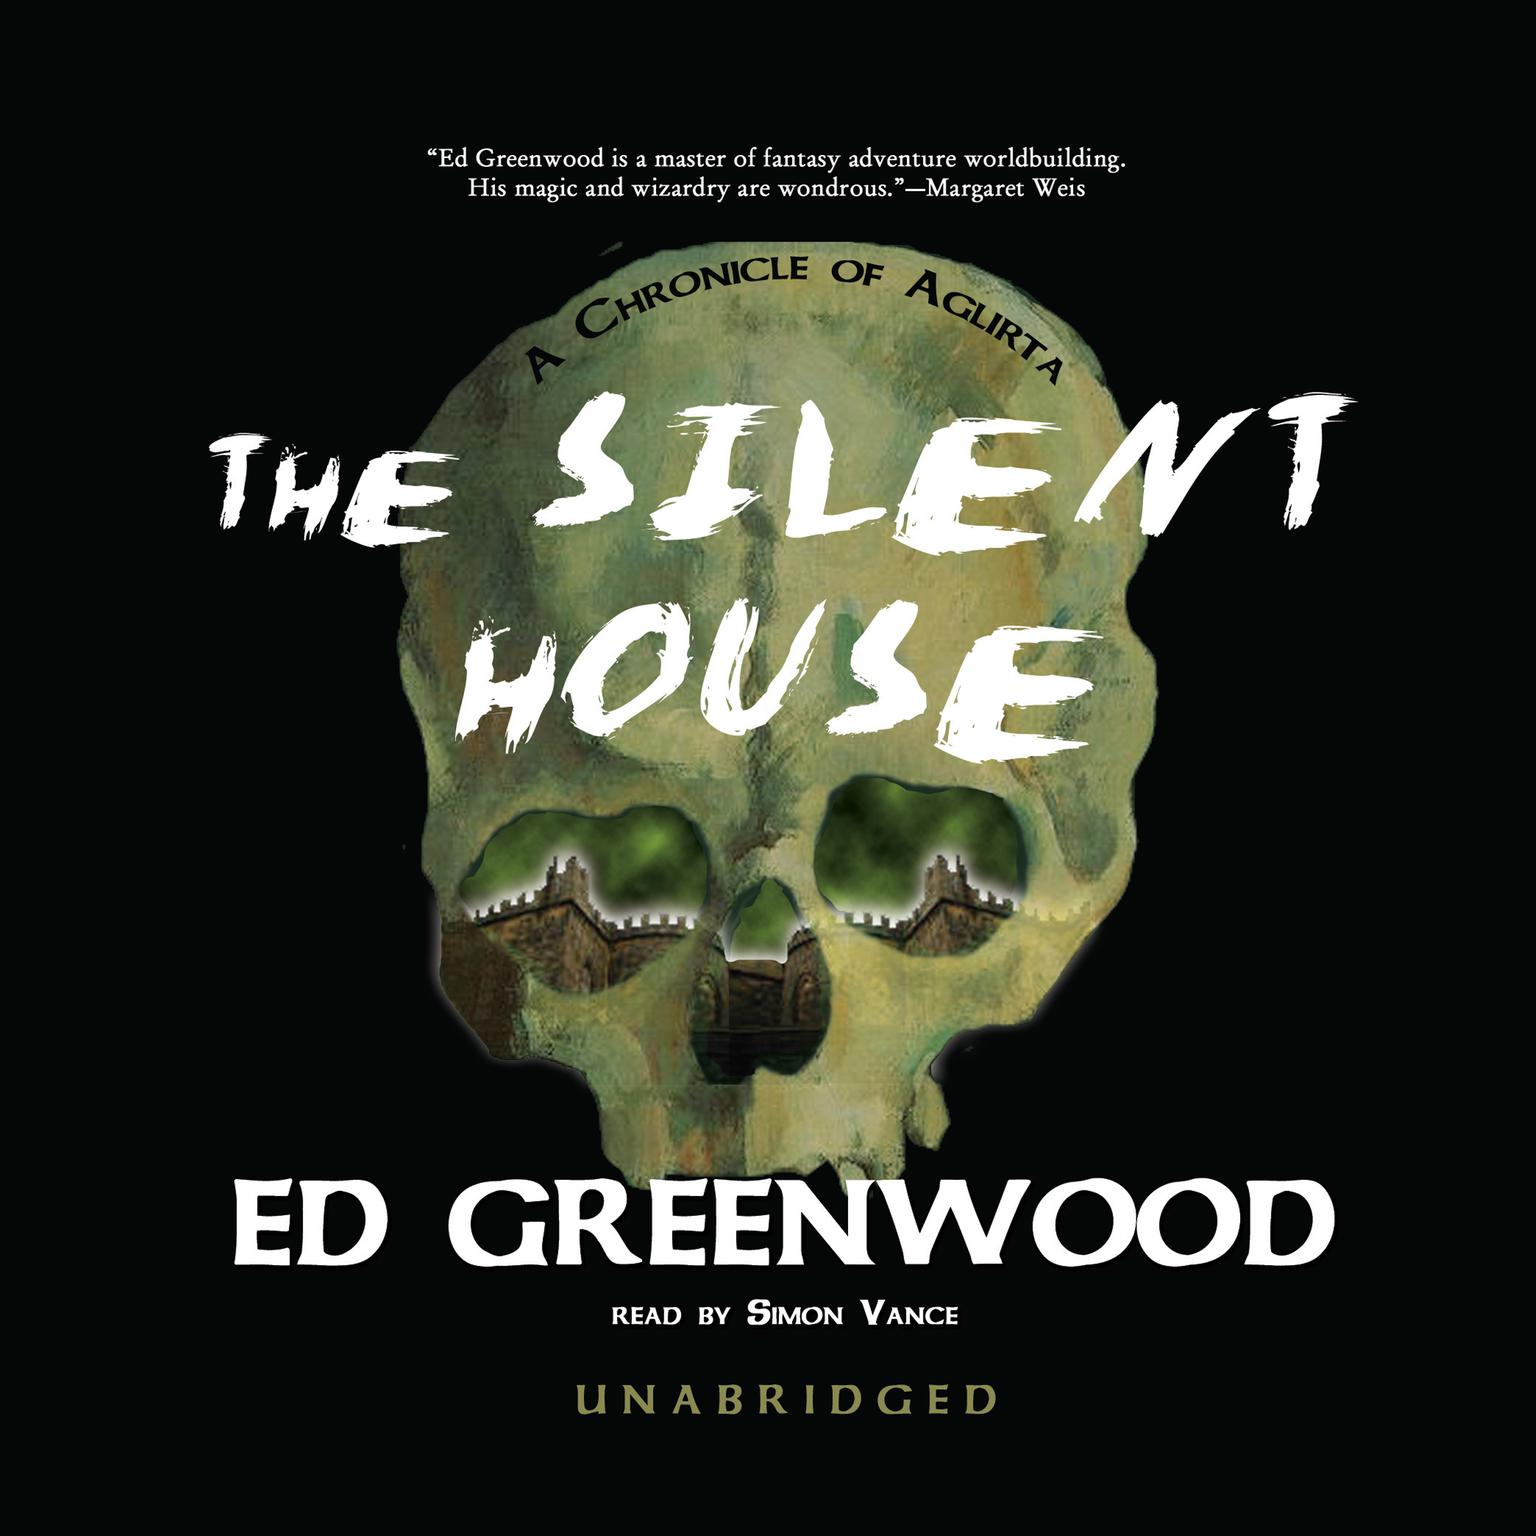 The Silent House: A Chronicle of Aglirta Audiobook, by Ed Greenwood